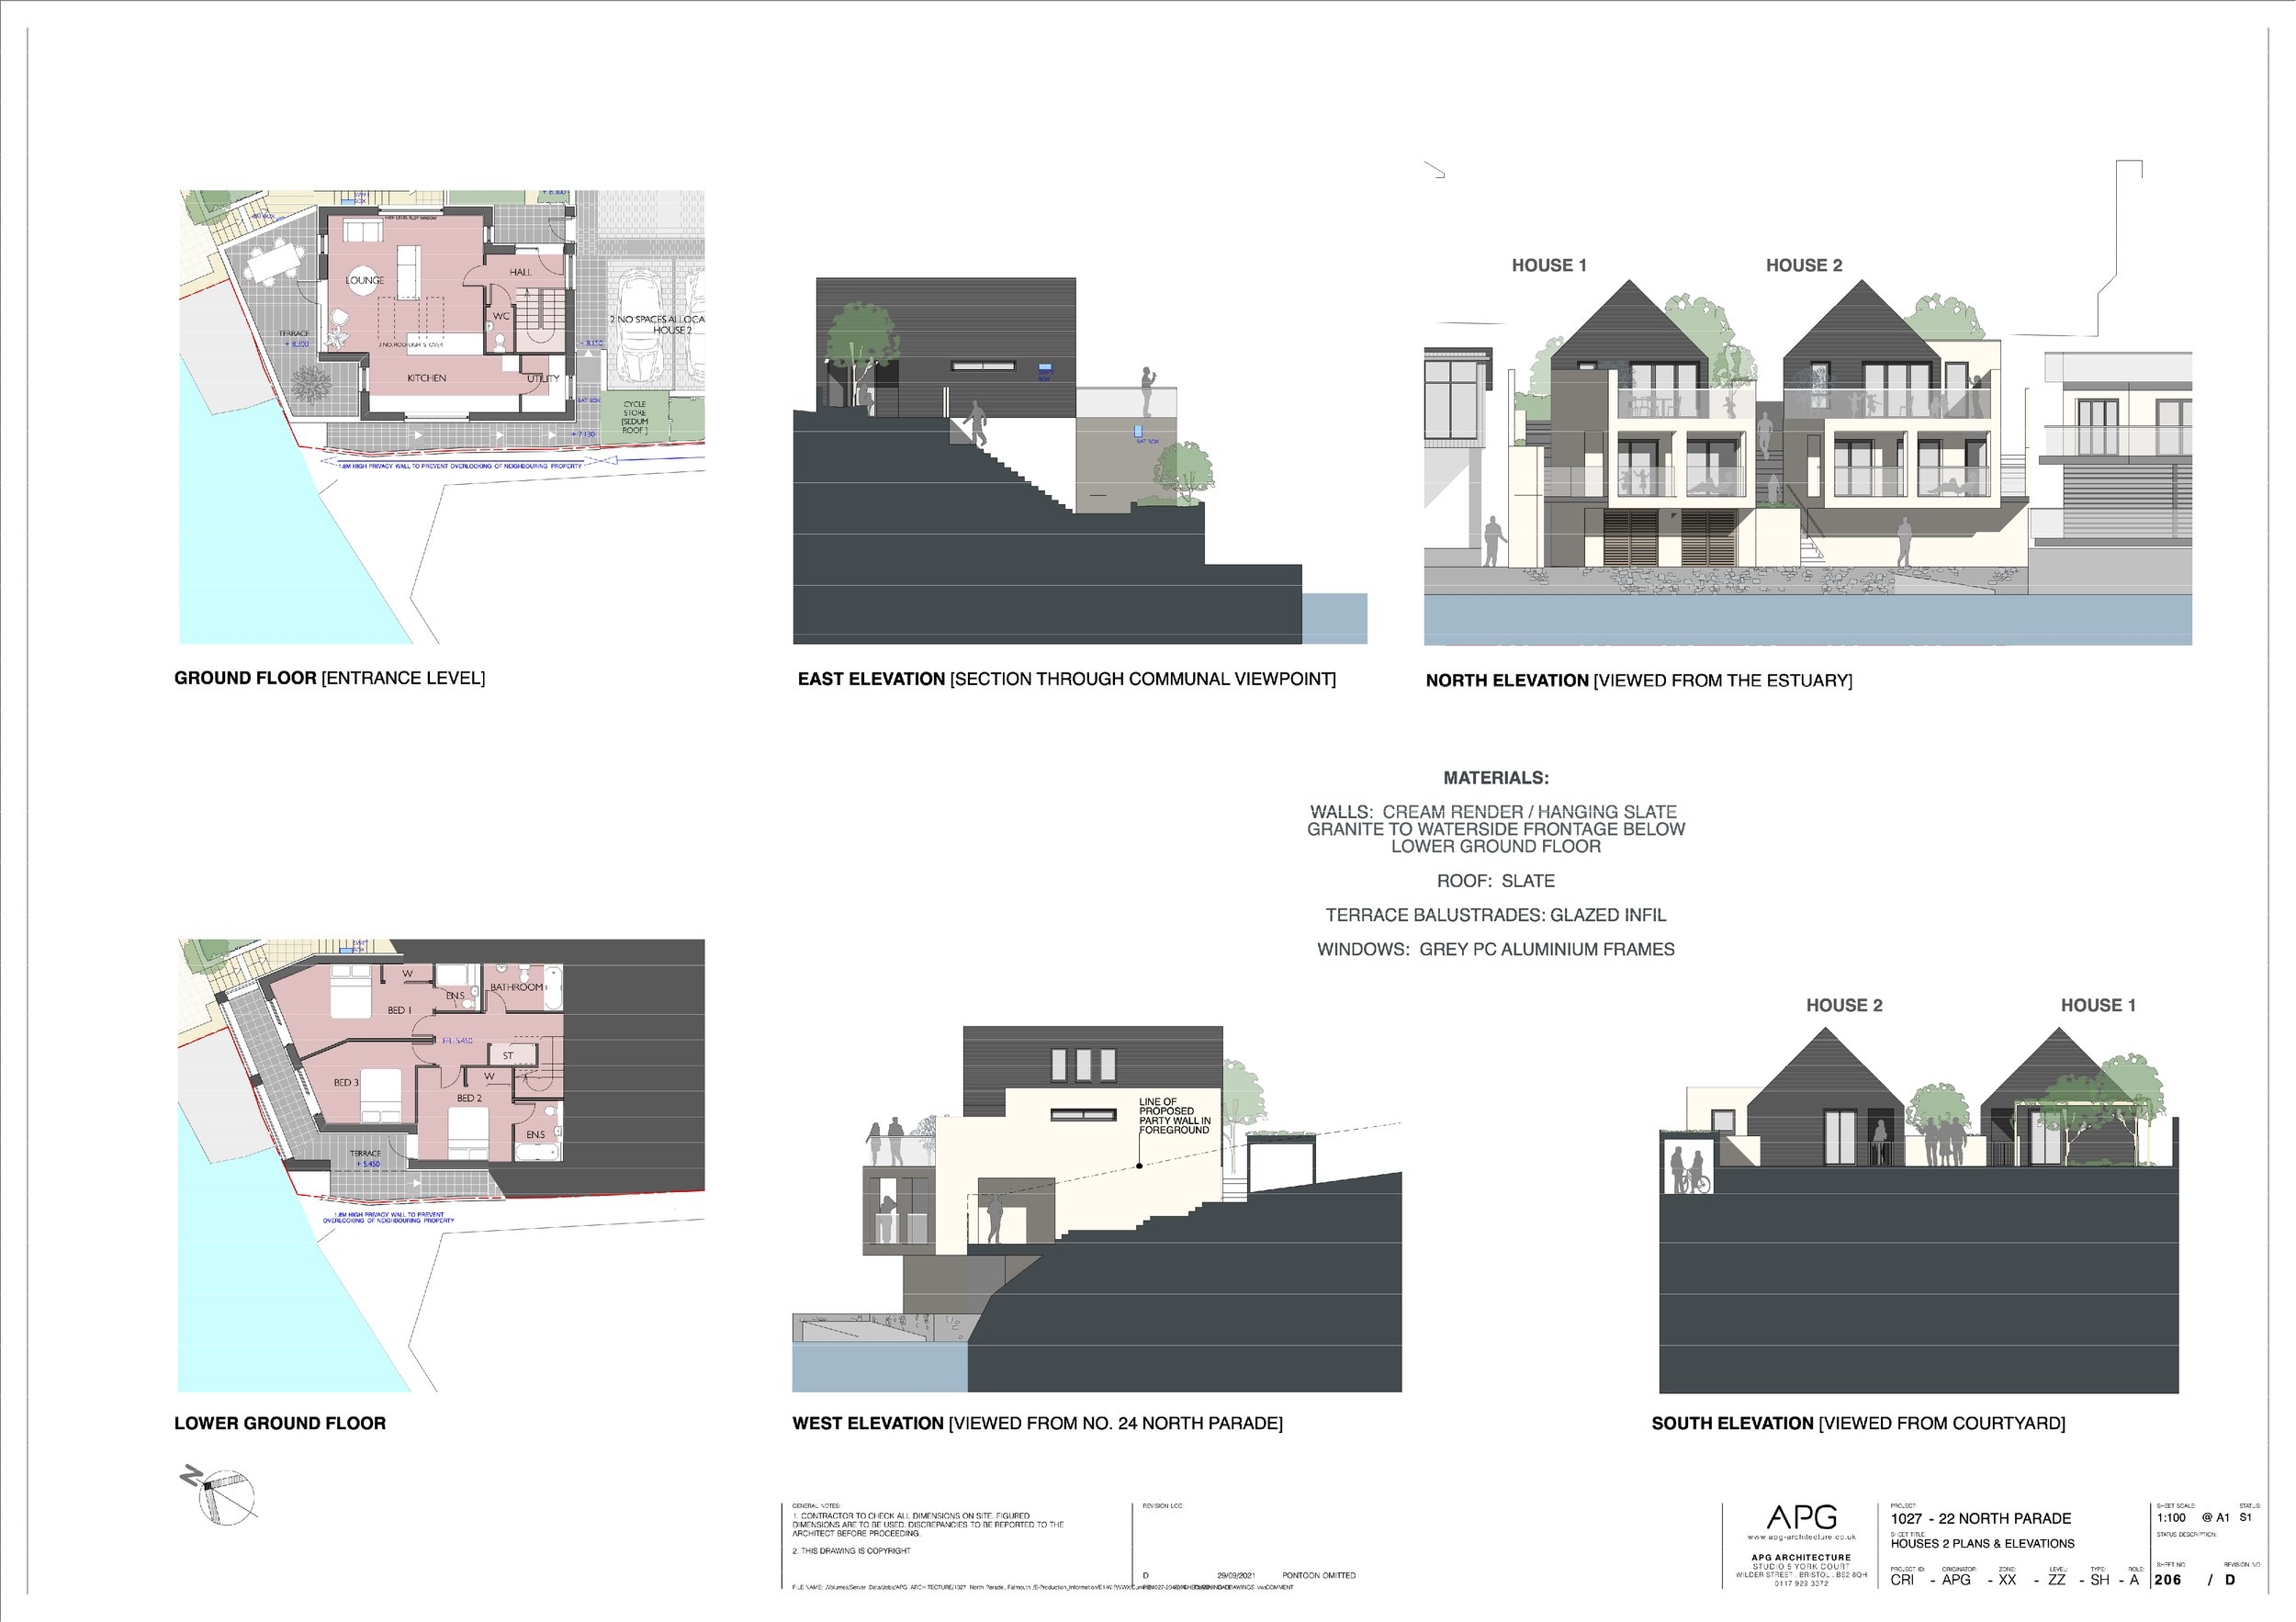 APG_Architecture_North_Parade_Falmouth_Elevations_02.jpg